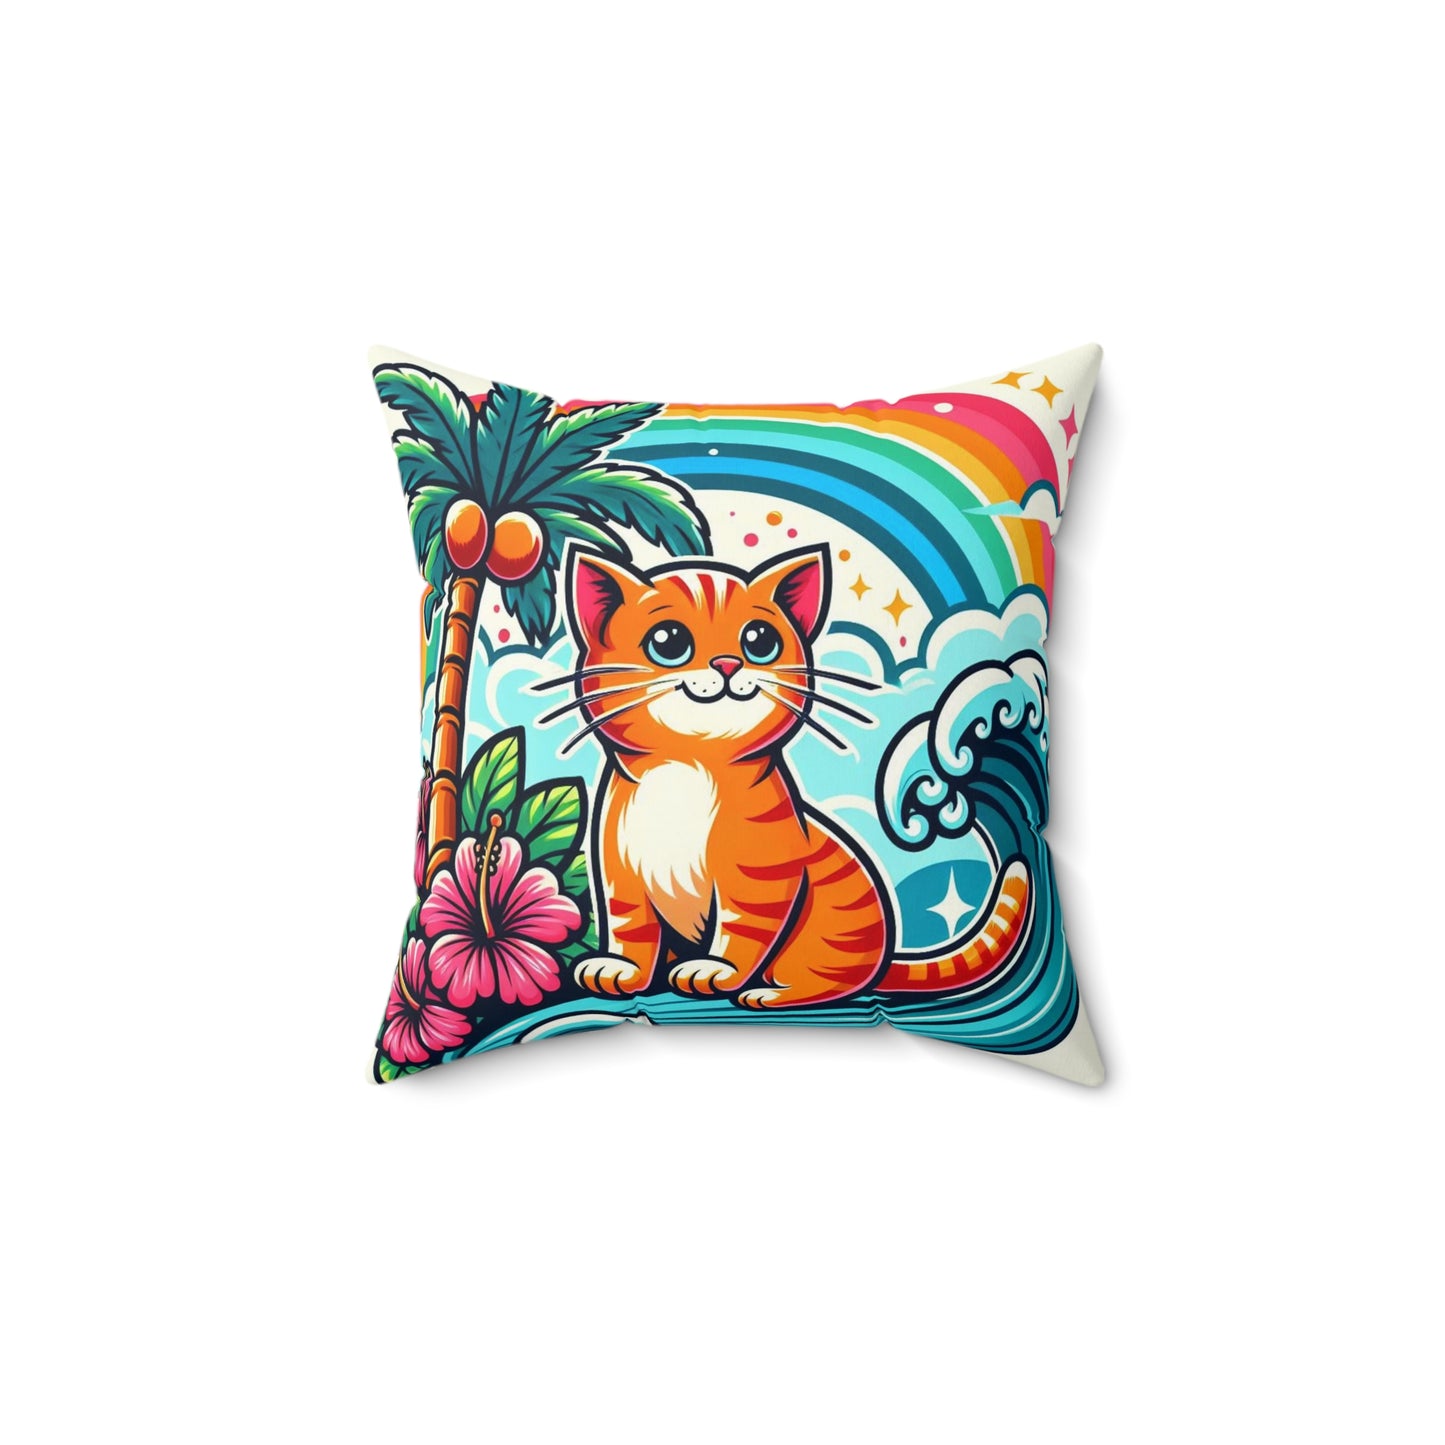 Tropical Kitty Pillow: Vibrant Comfort for Cat Lovers!